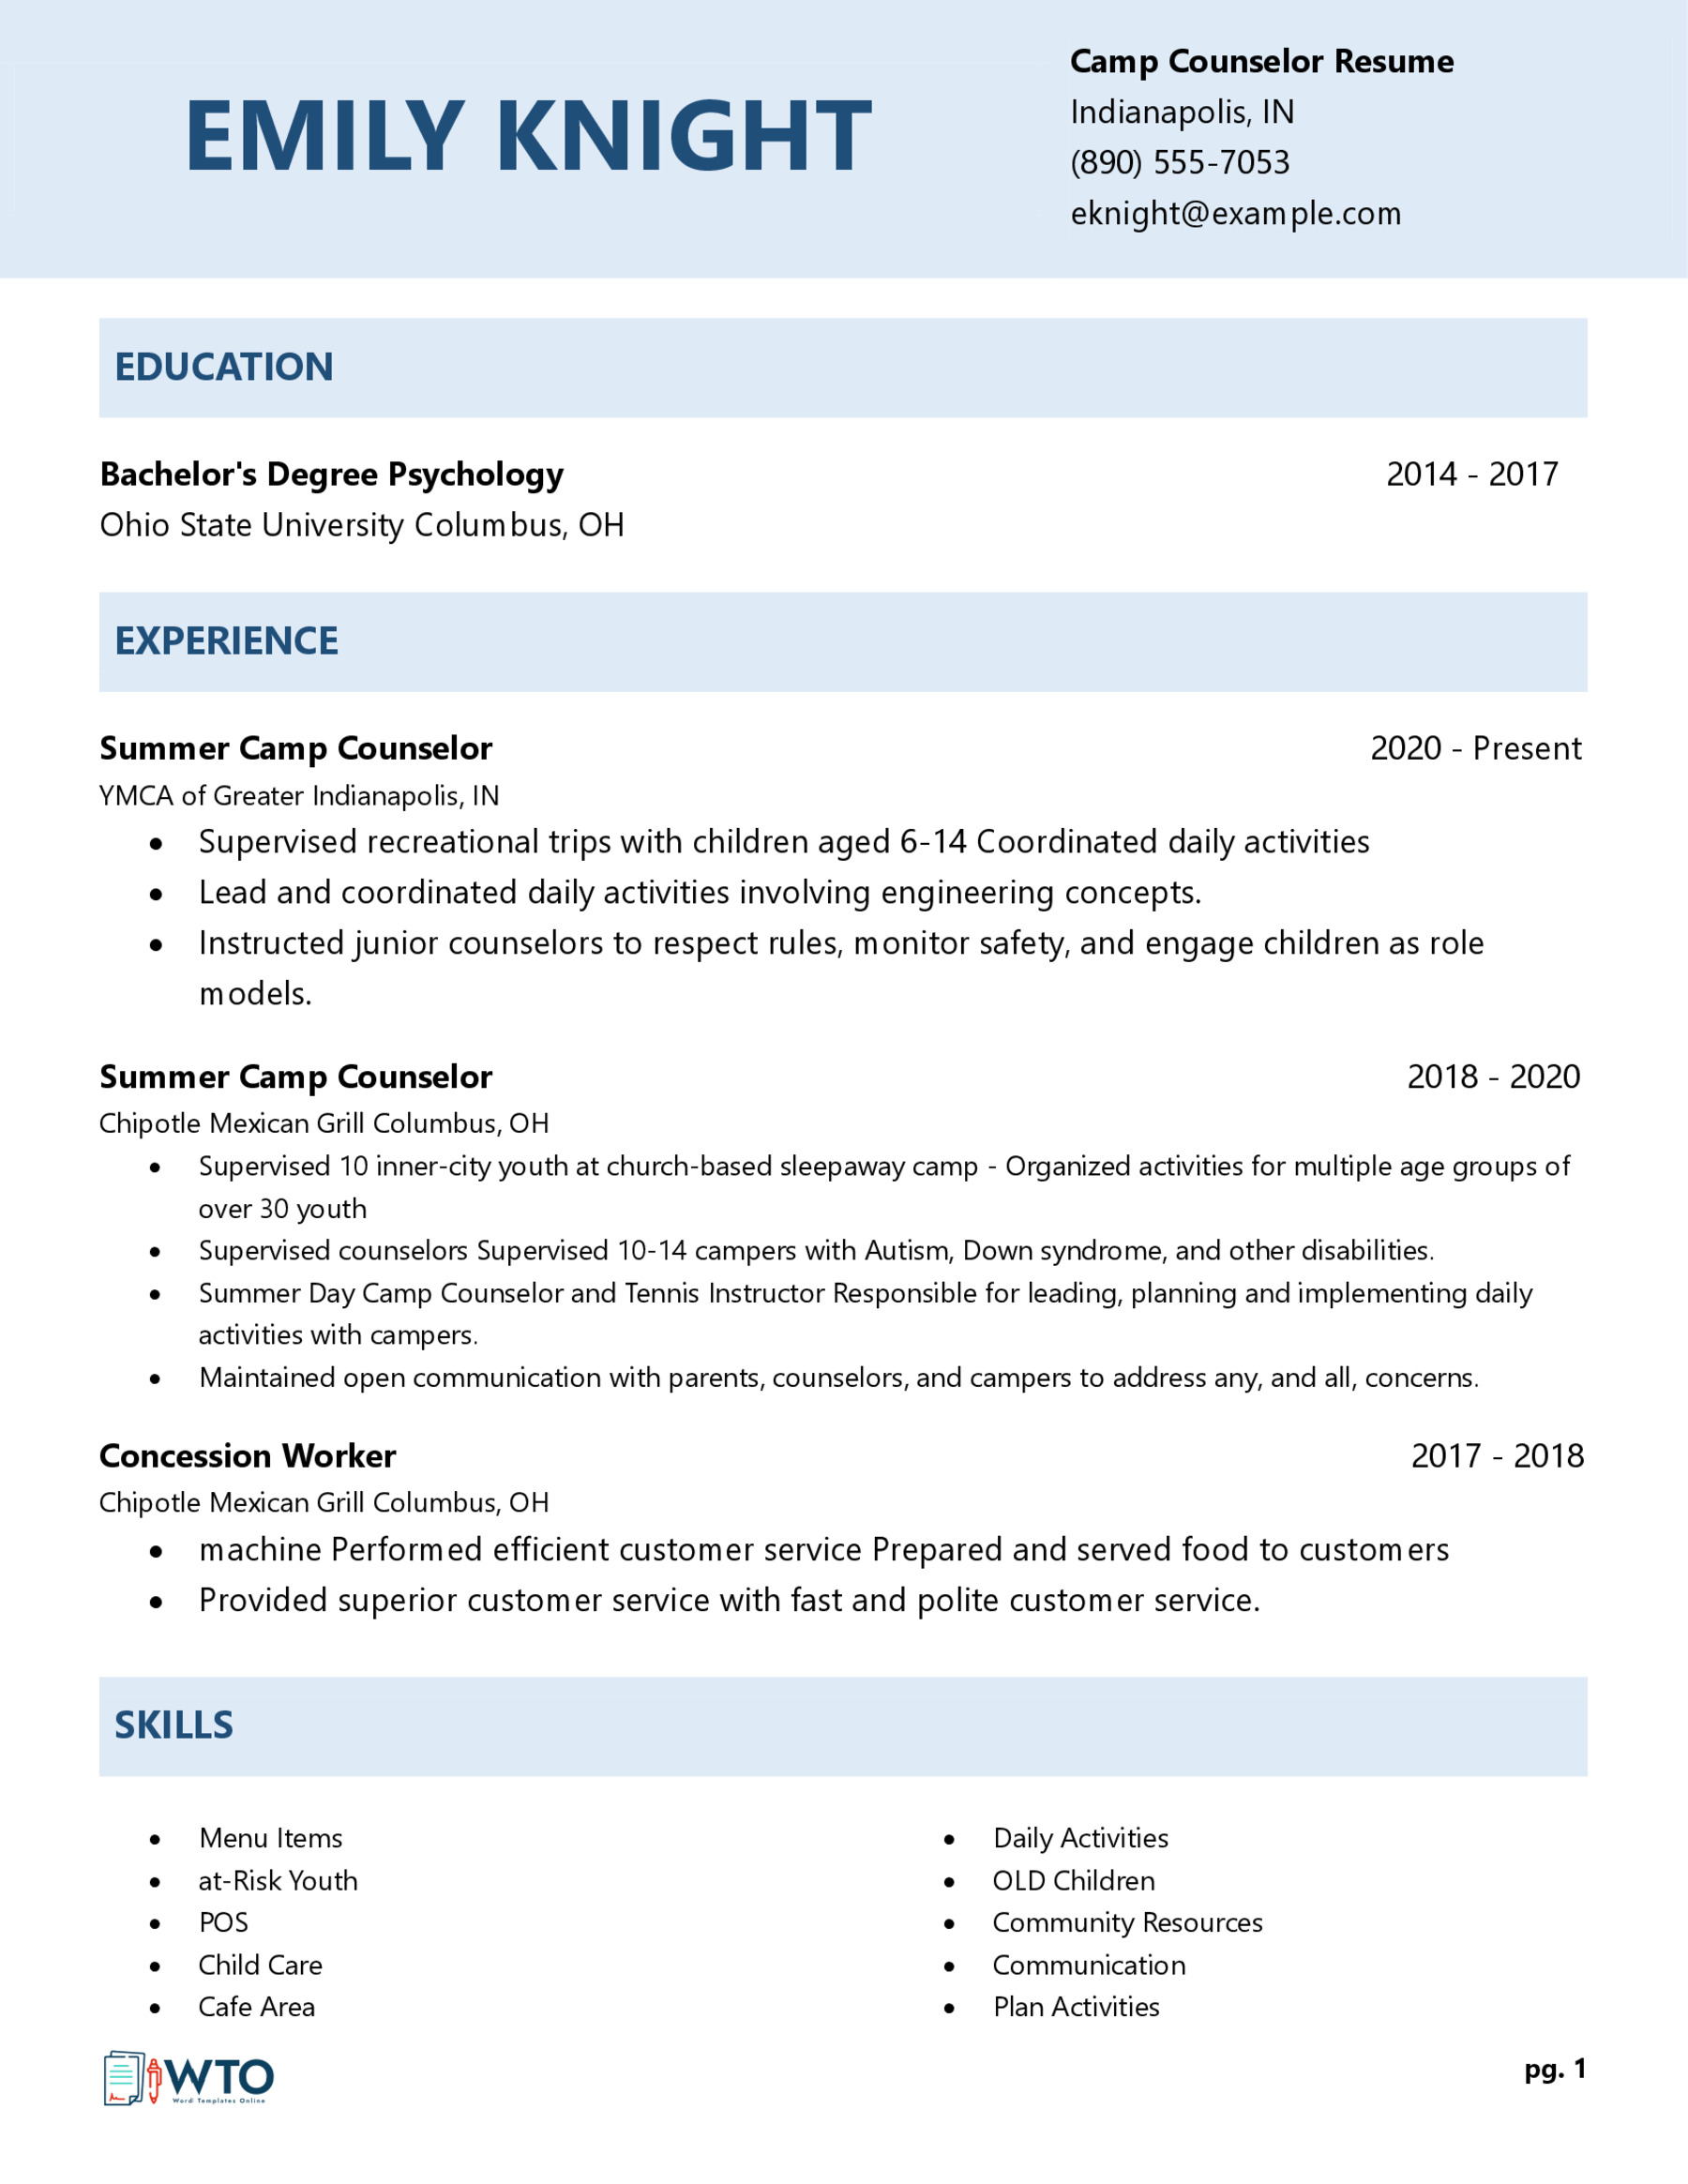 Camp Counselor Resume - Effective Format